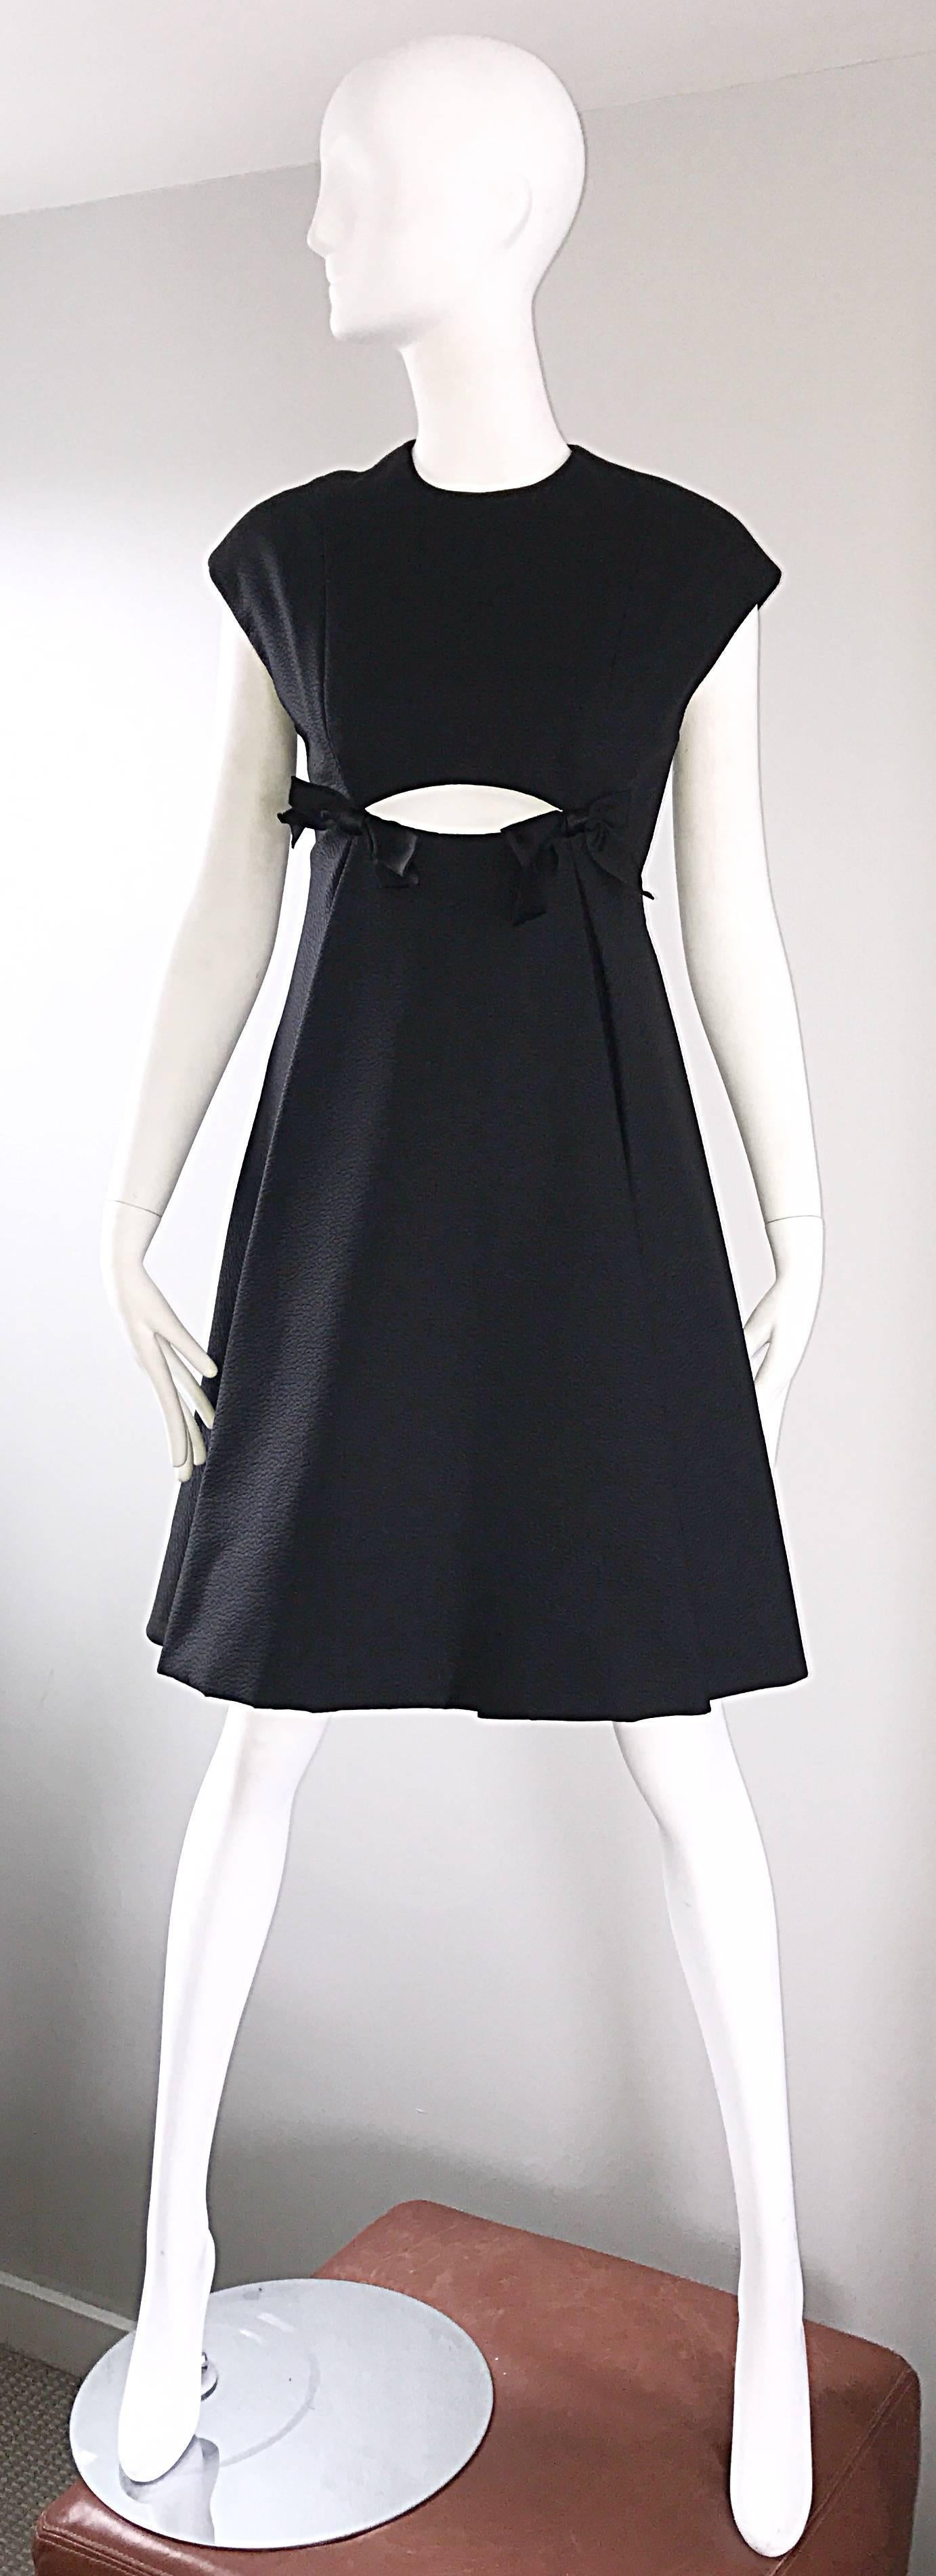 Rare MUSUEM QUALITY vintage 60s GEOFFREY BEENE black silk cut-out short sleeve A-Line dress! This one's for the musuems! Classic black dress, with a mod twist. Cut-out below the bust, with two black satin bows. Heavy duty silk holds shape nicely.